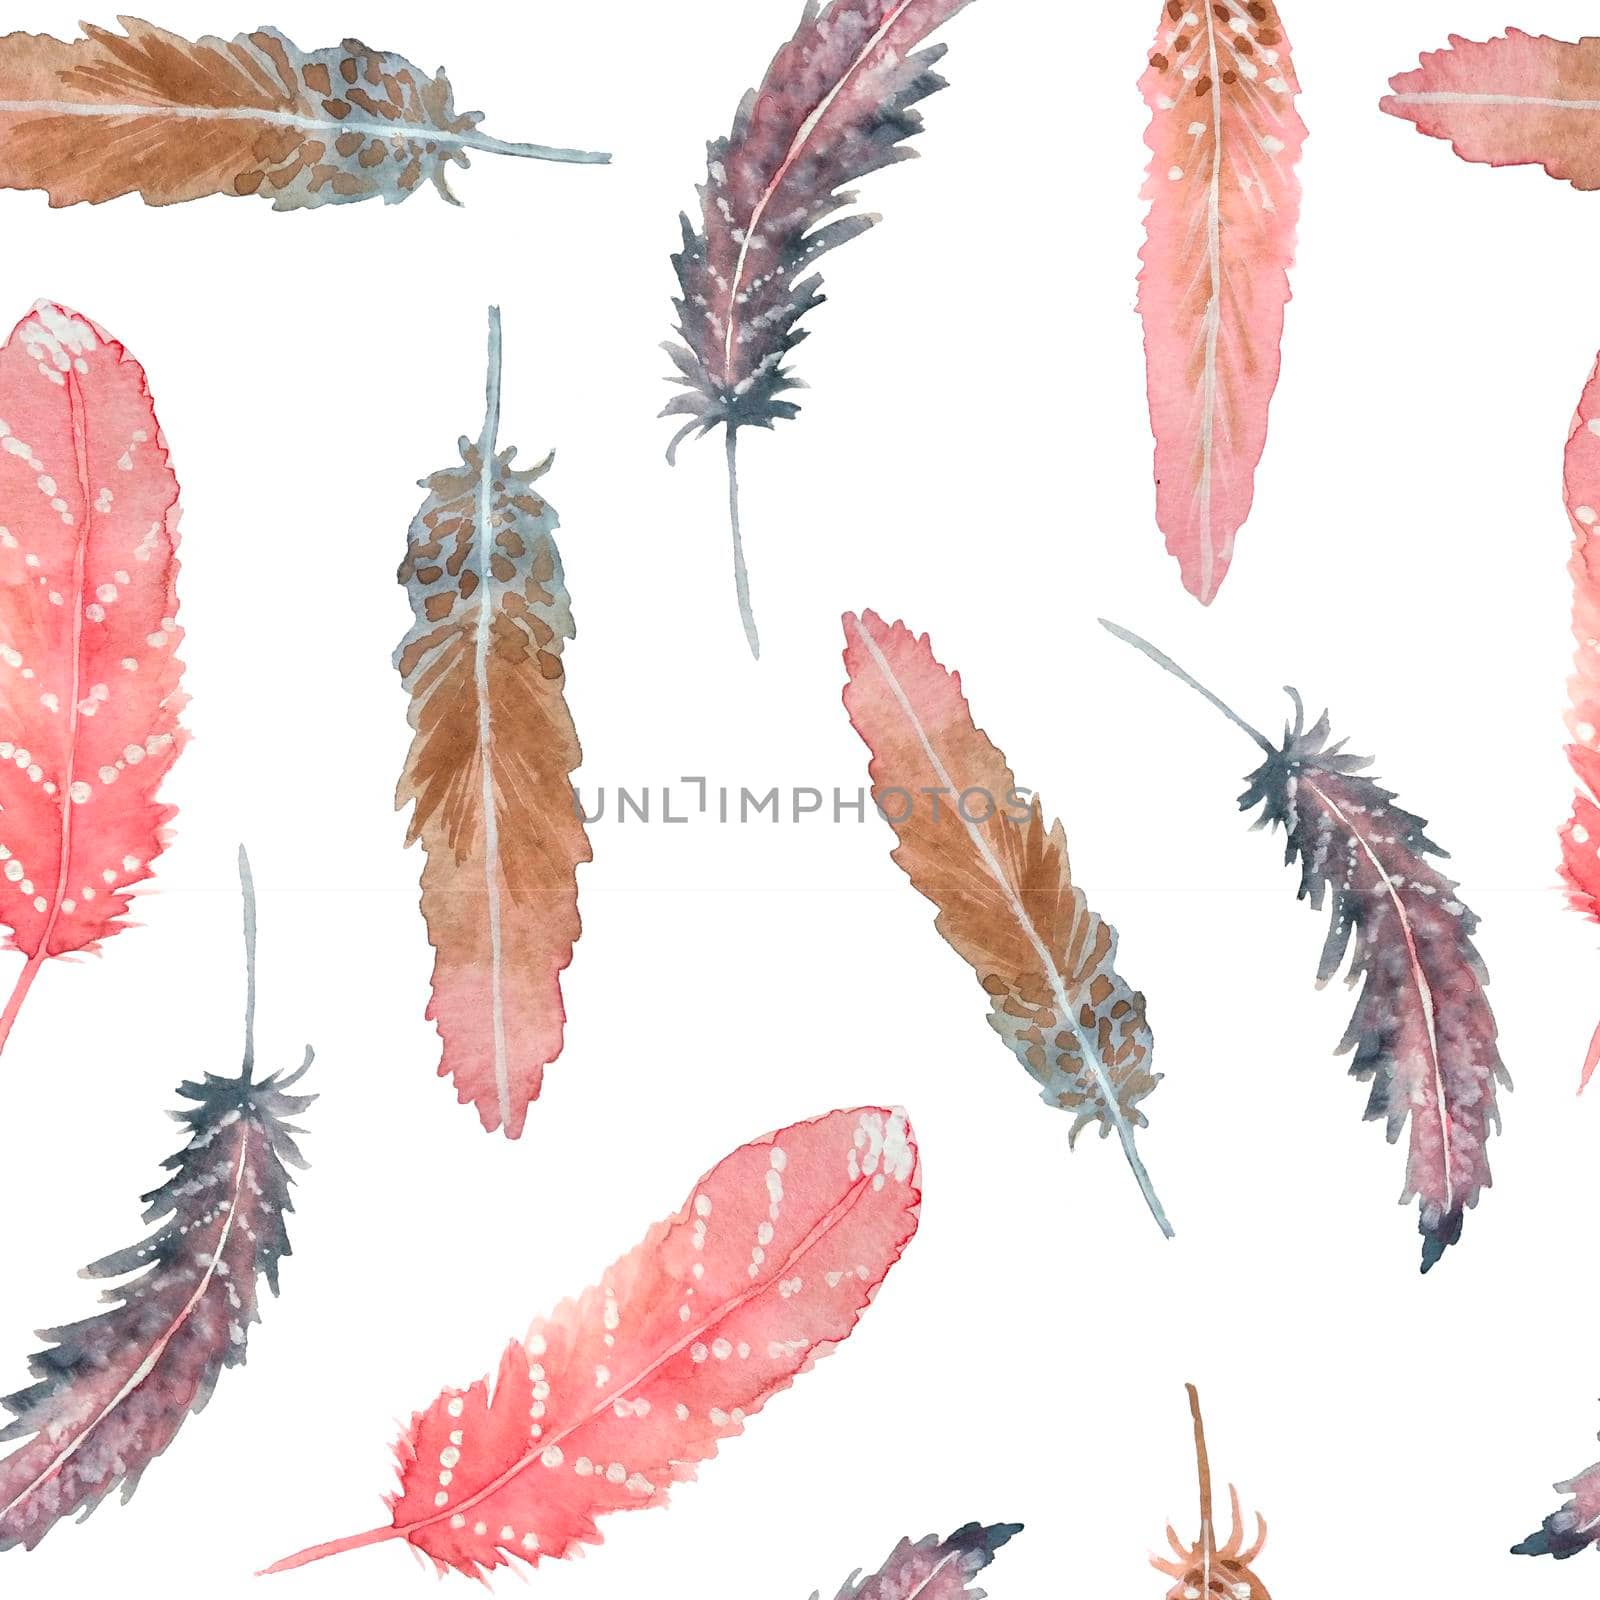 Watercolor seamless pattern with pink and brown boho bohemian feathers. Tribal tribe traditional design. Neutral elegant colors for graphic decor wallpapers wrapping paper textile